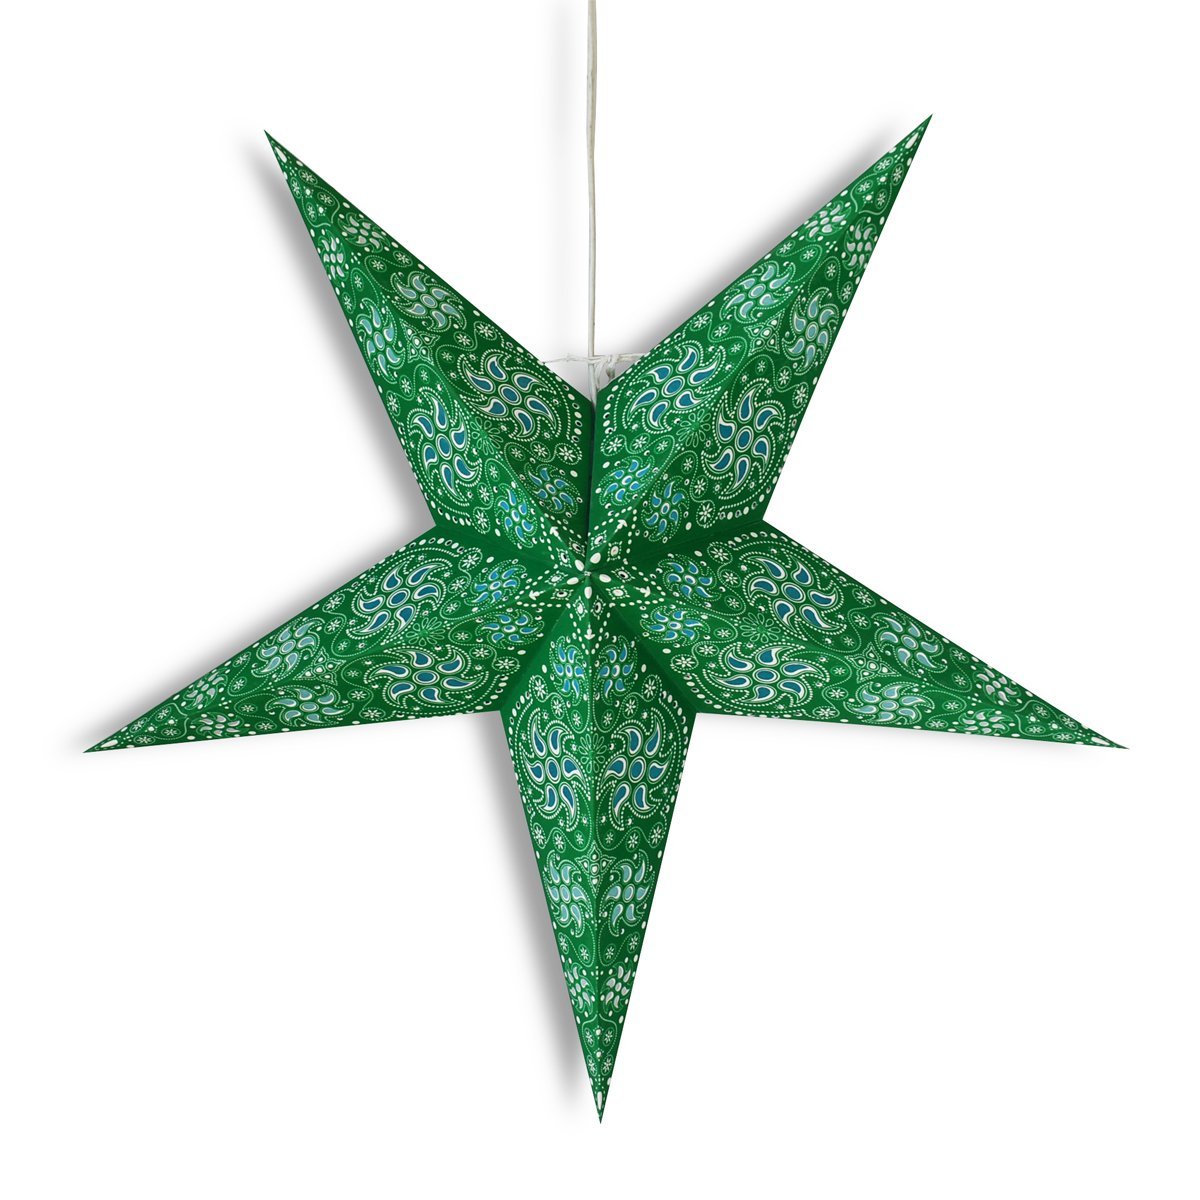 3-PACK + Cord | 24&quot; Green Winds Paper Star Lantern and Lamp Cord Hanging Decoration - PaperLanternStore.com - Paper Lanterns, Decor, Party Lights &amp; More